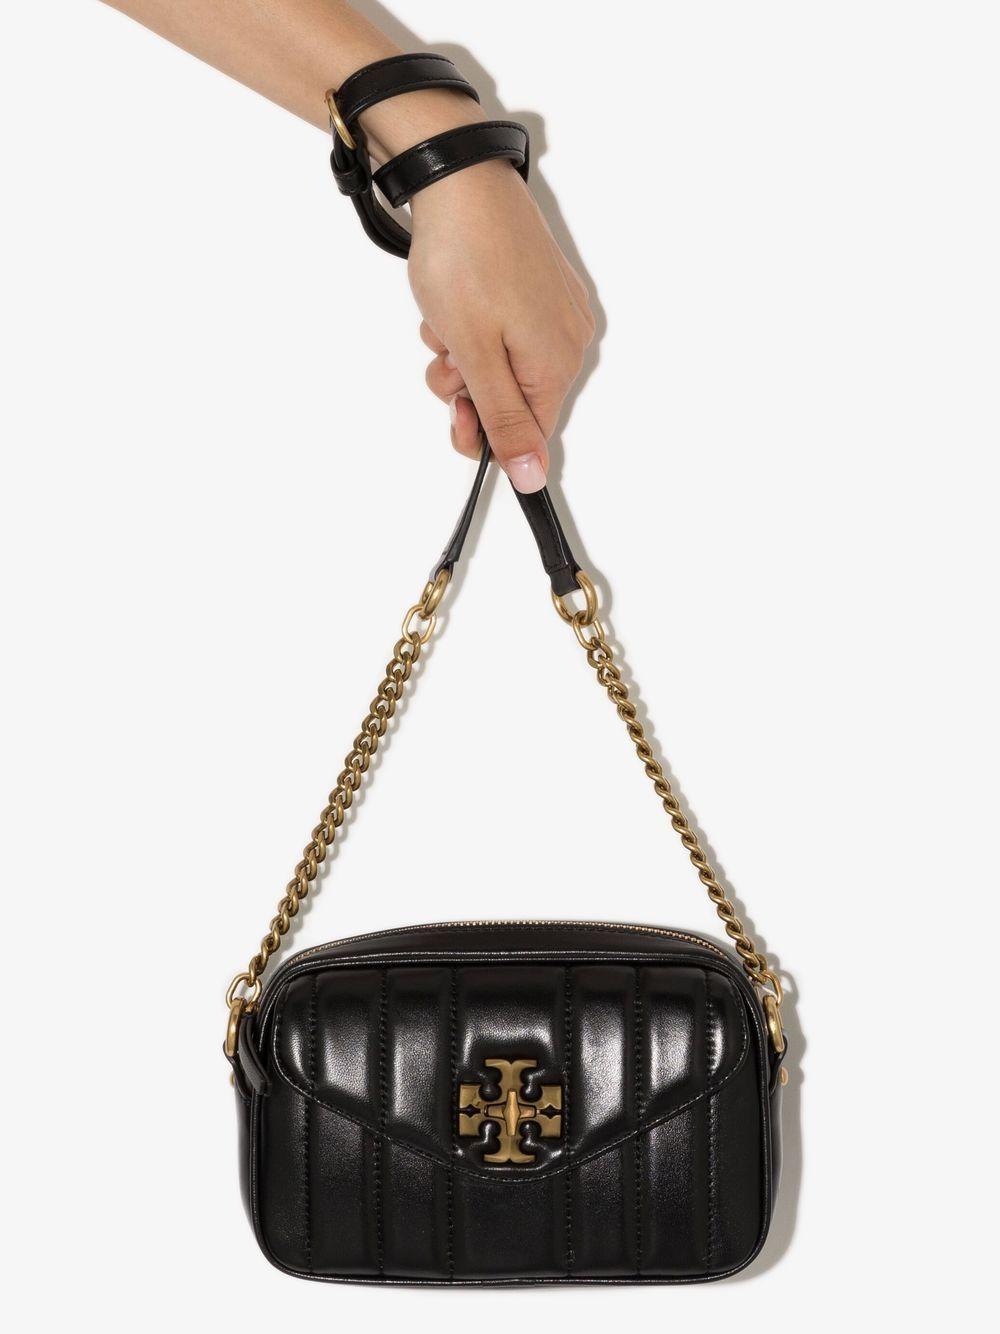 Tory Burch Kira Quilted Camera Bag in Black | Lyst